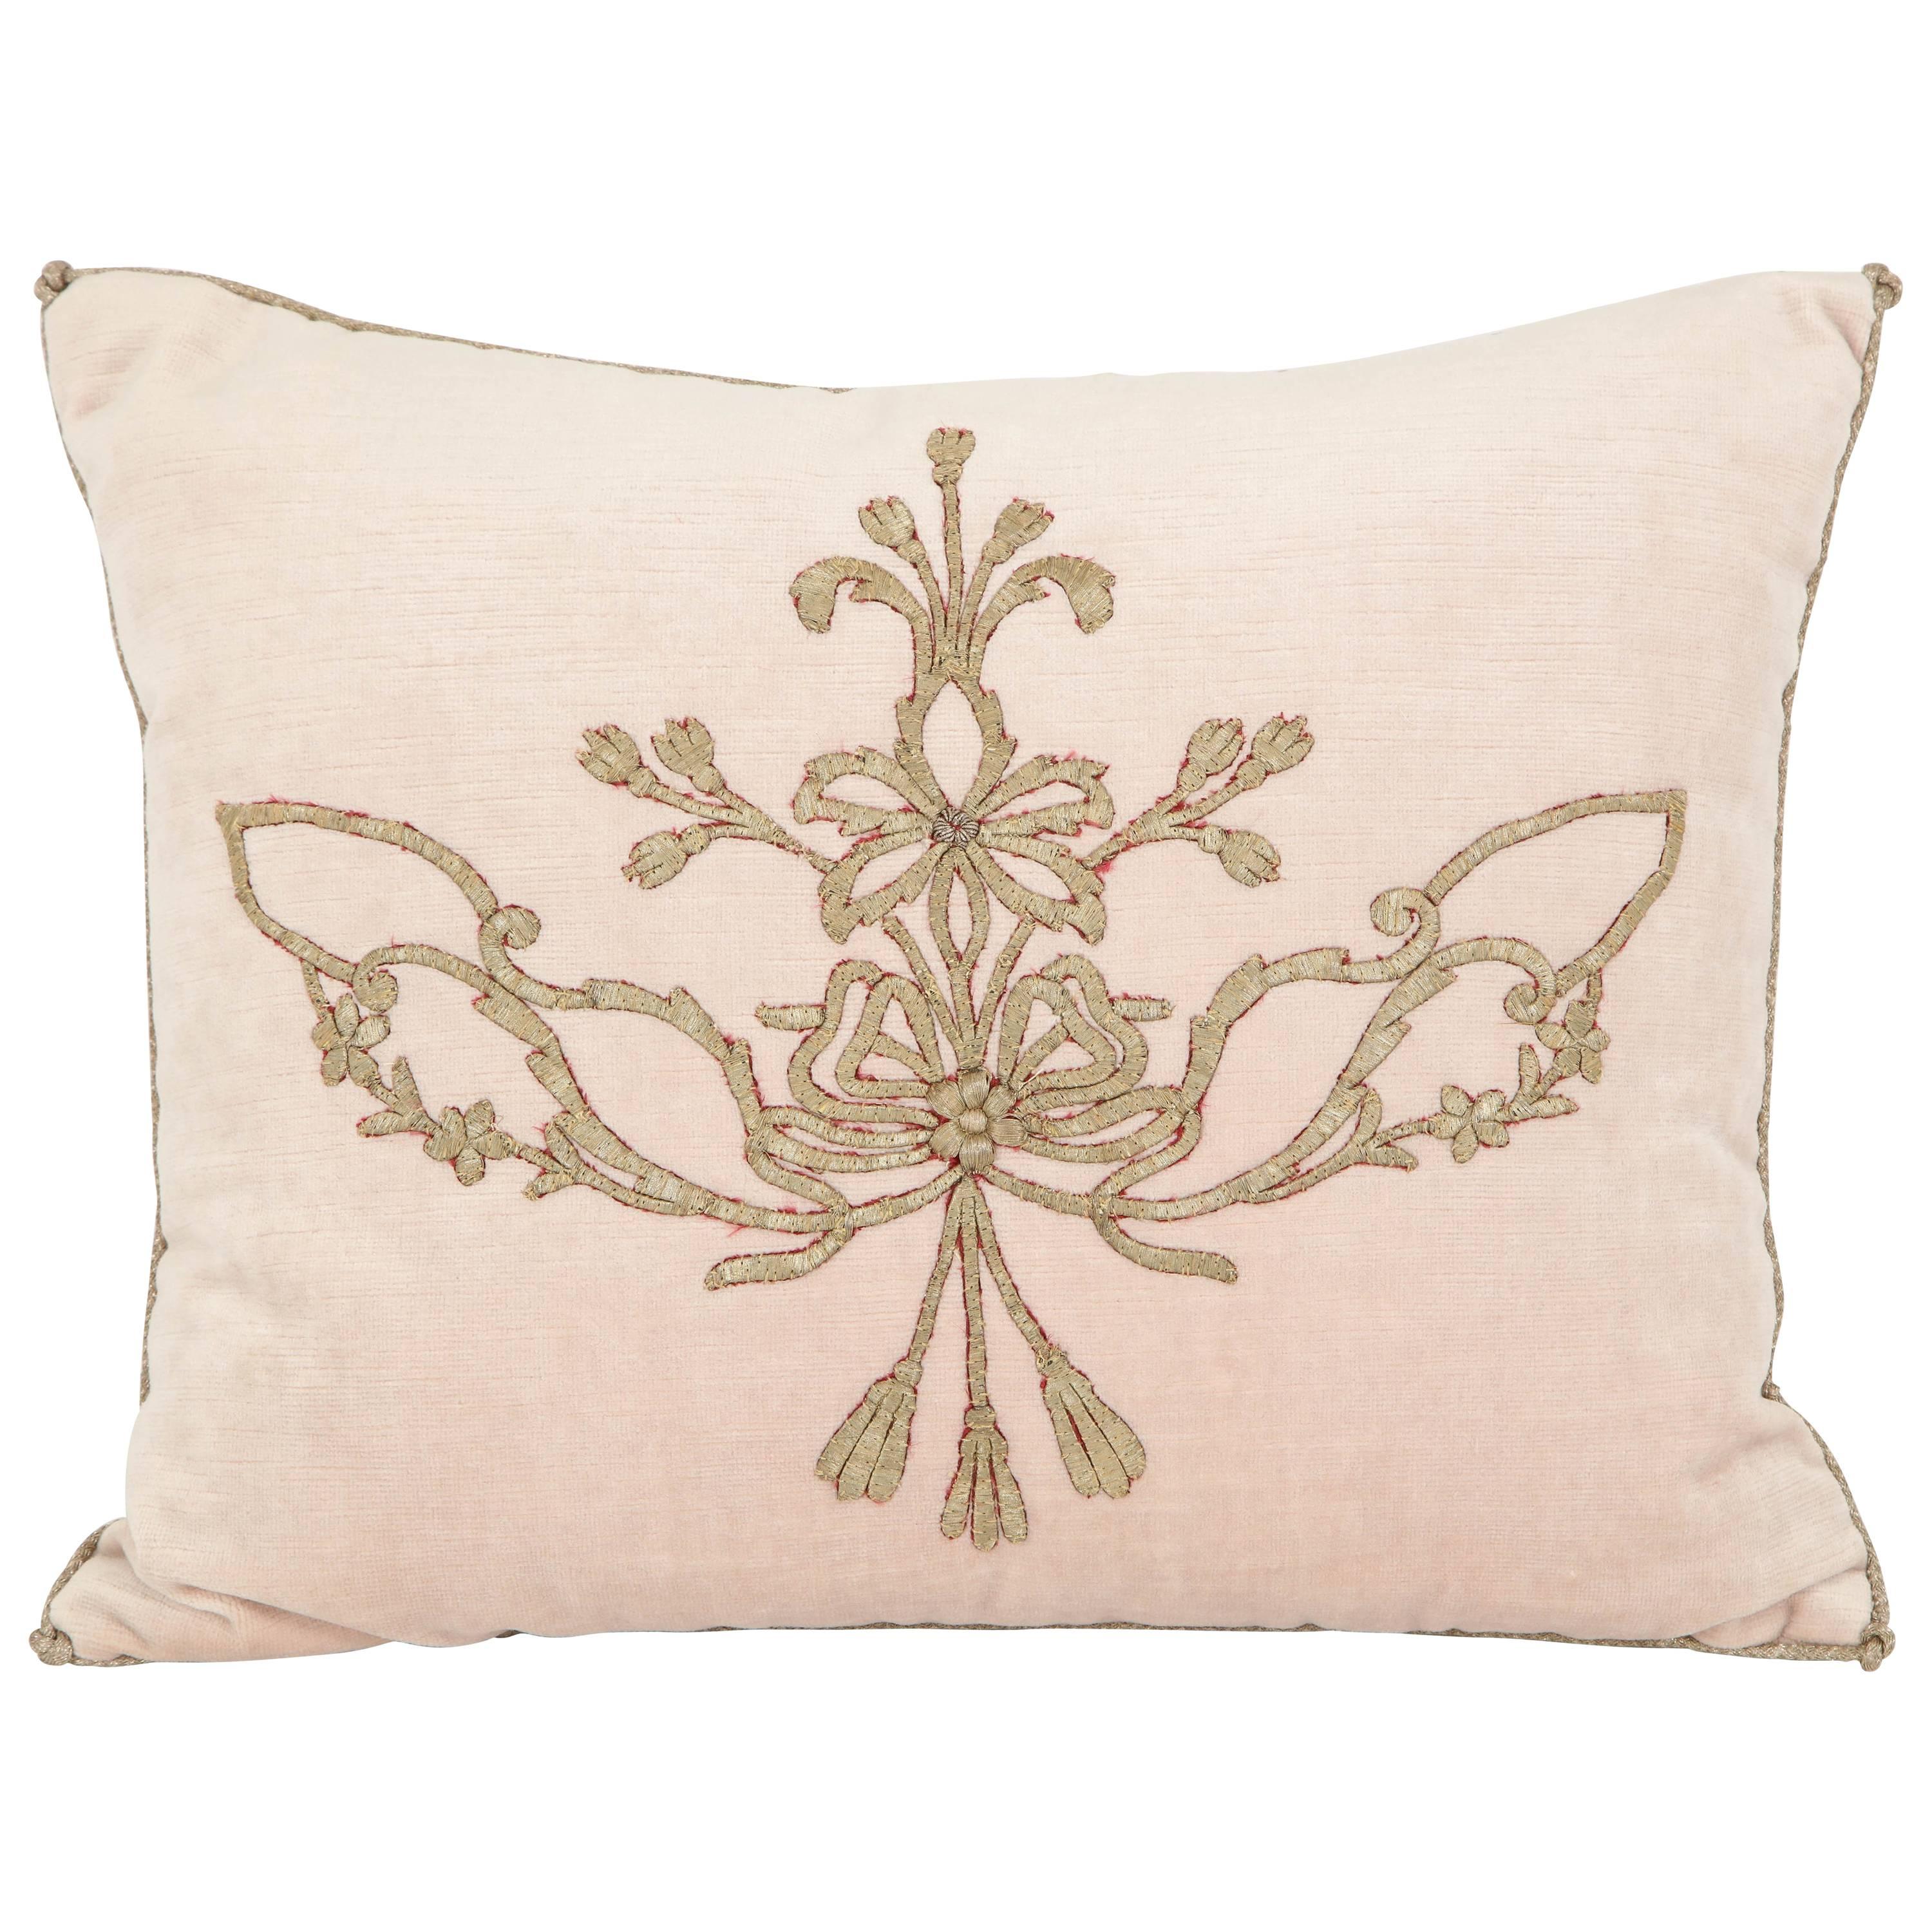 Pillow with Antique Embroidery